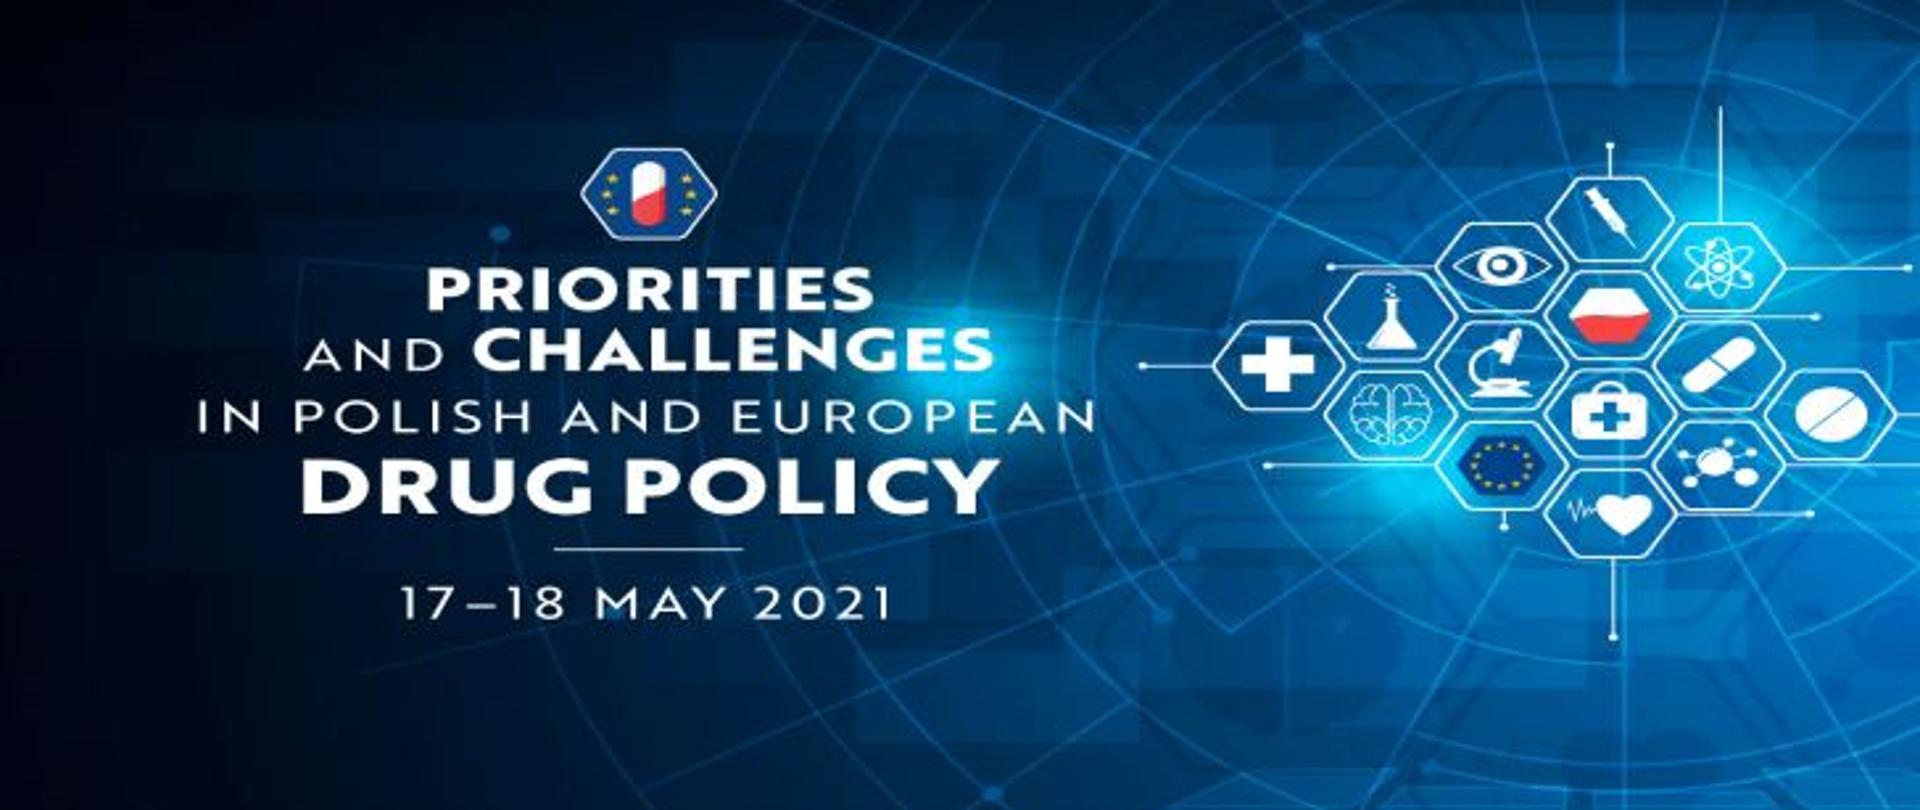 Grafika_-_Priorities_and_challenges_in_Polish_and_European_drug_policy